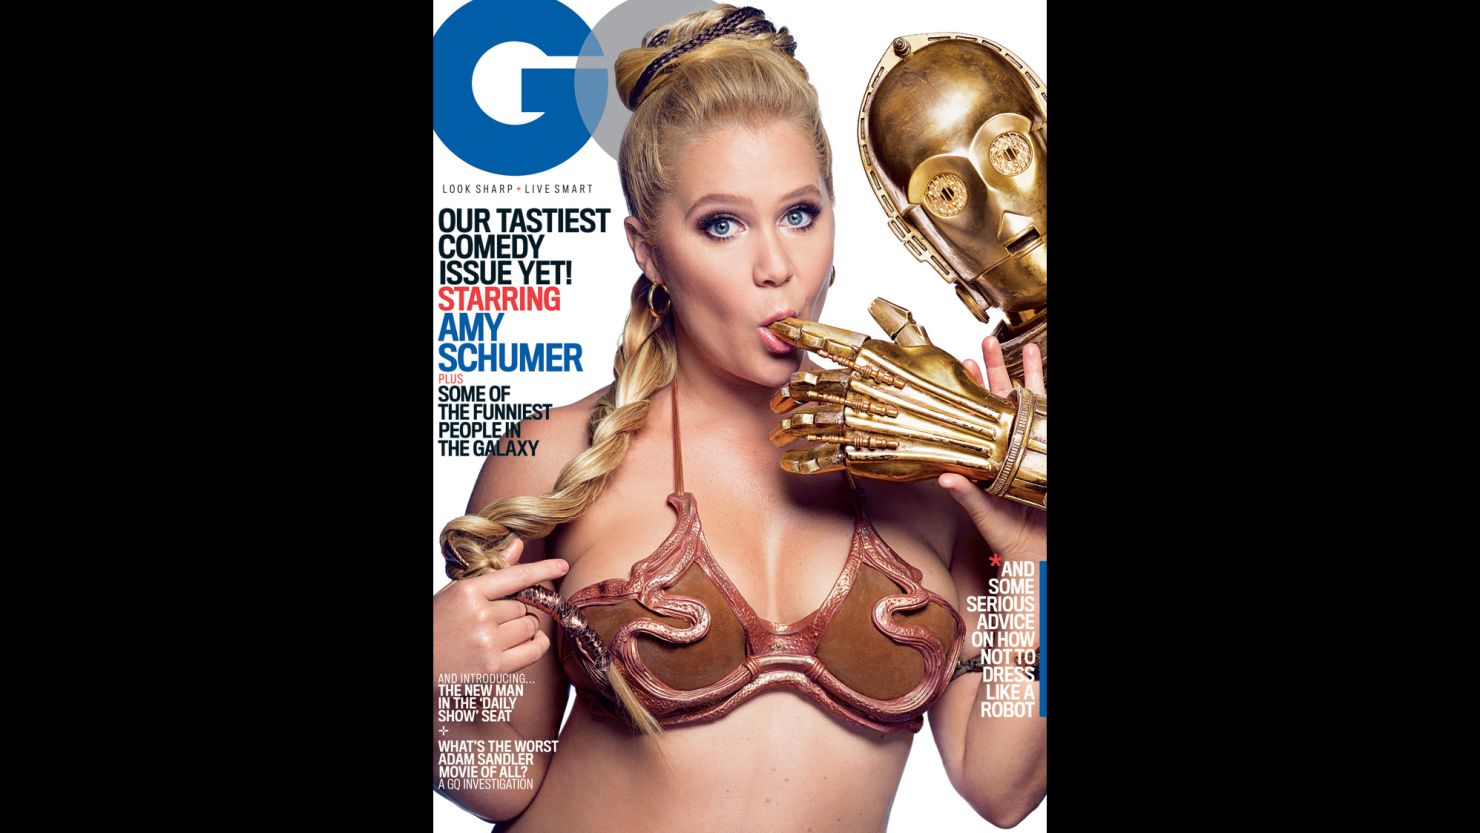 Amy Schumer goes 'Star Wars' for GQ cover